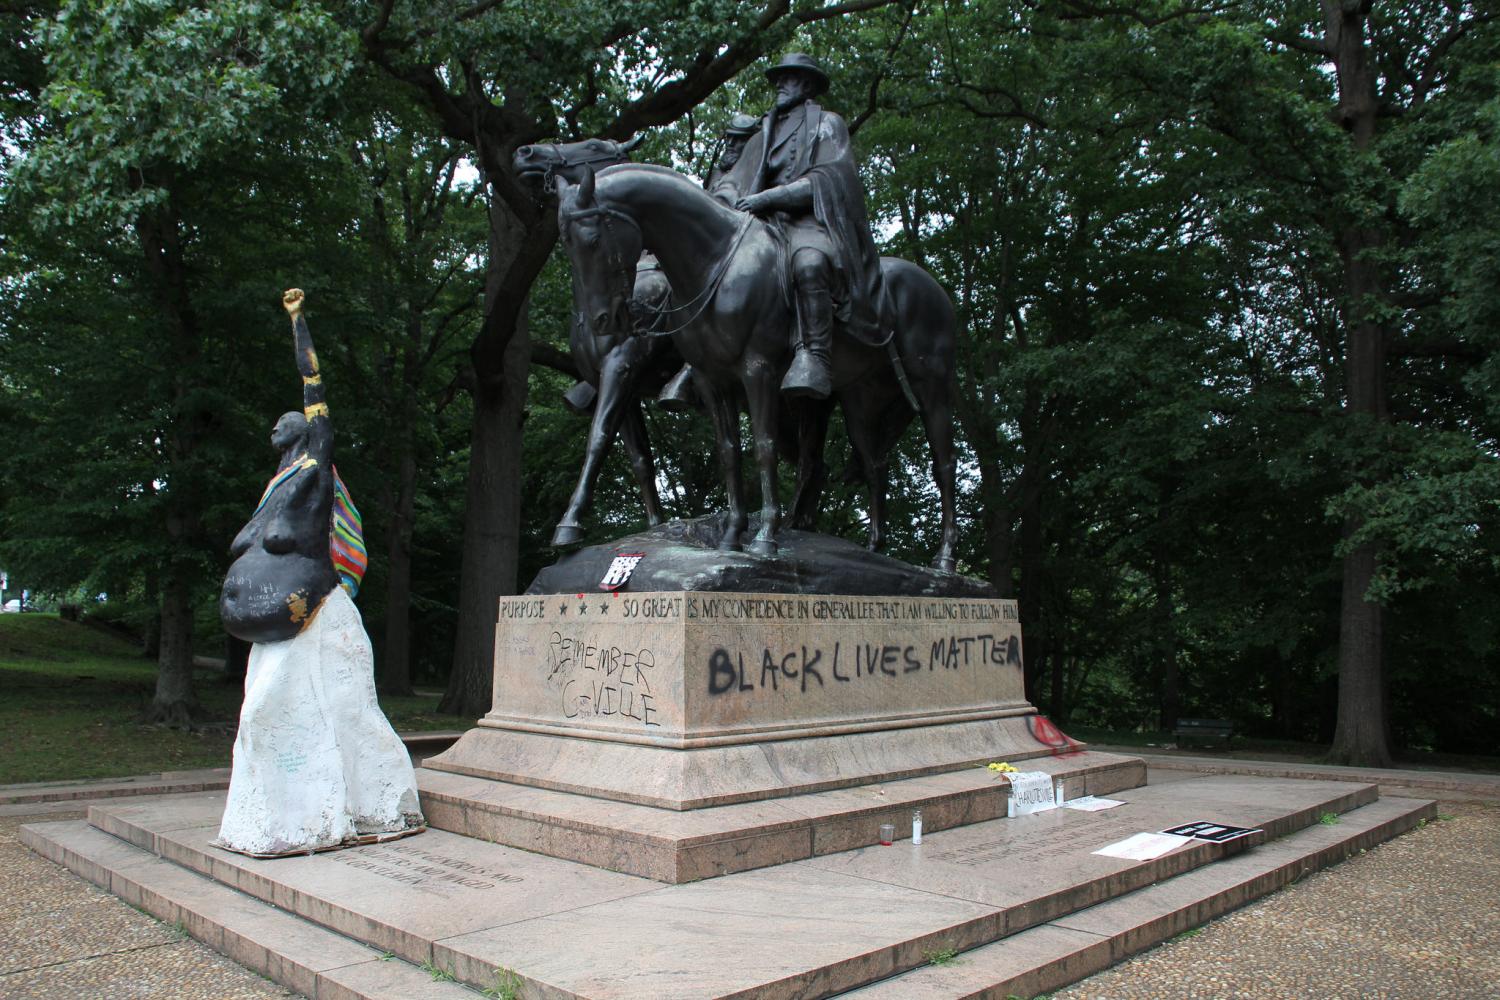 A defaced Confederate monument